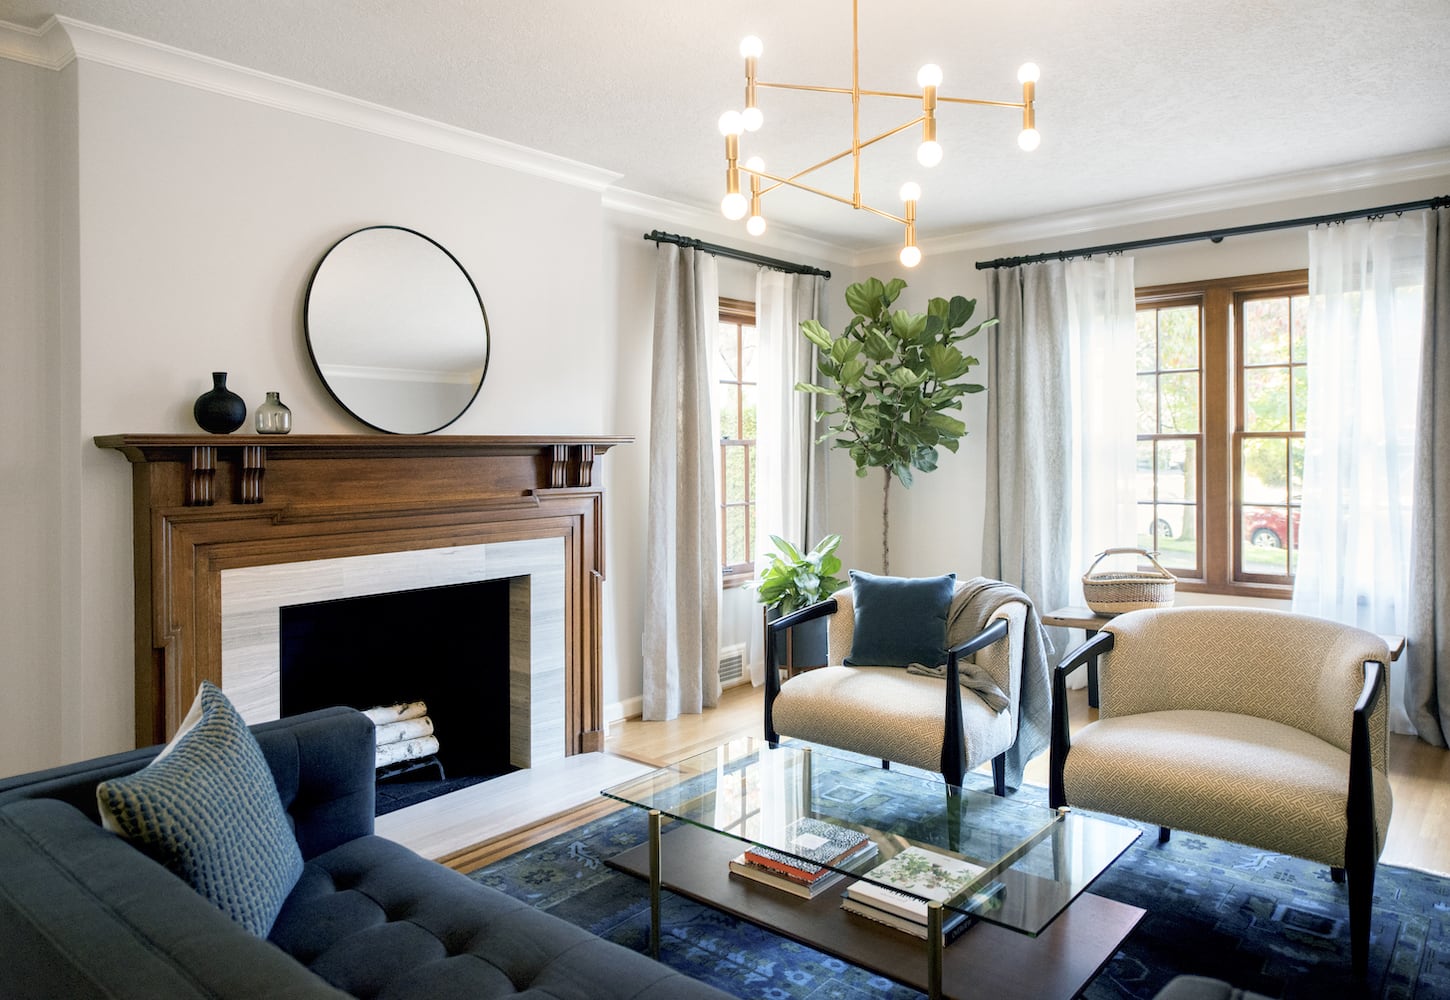 Living room with original traditional wood fireplace trim, modern gold chandelier